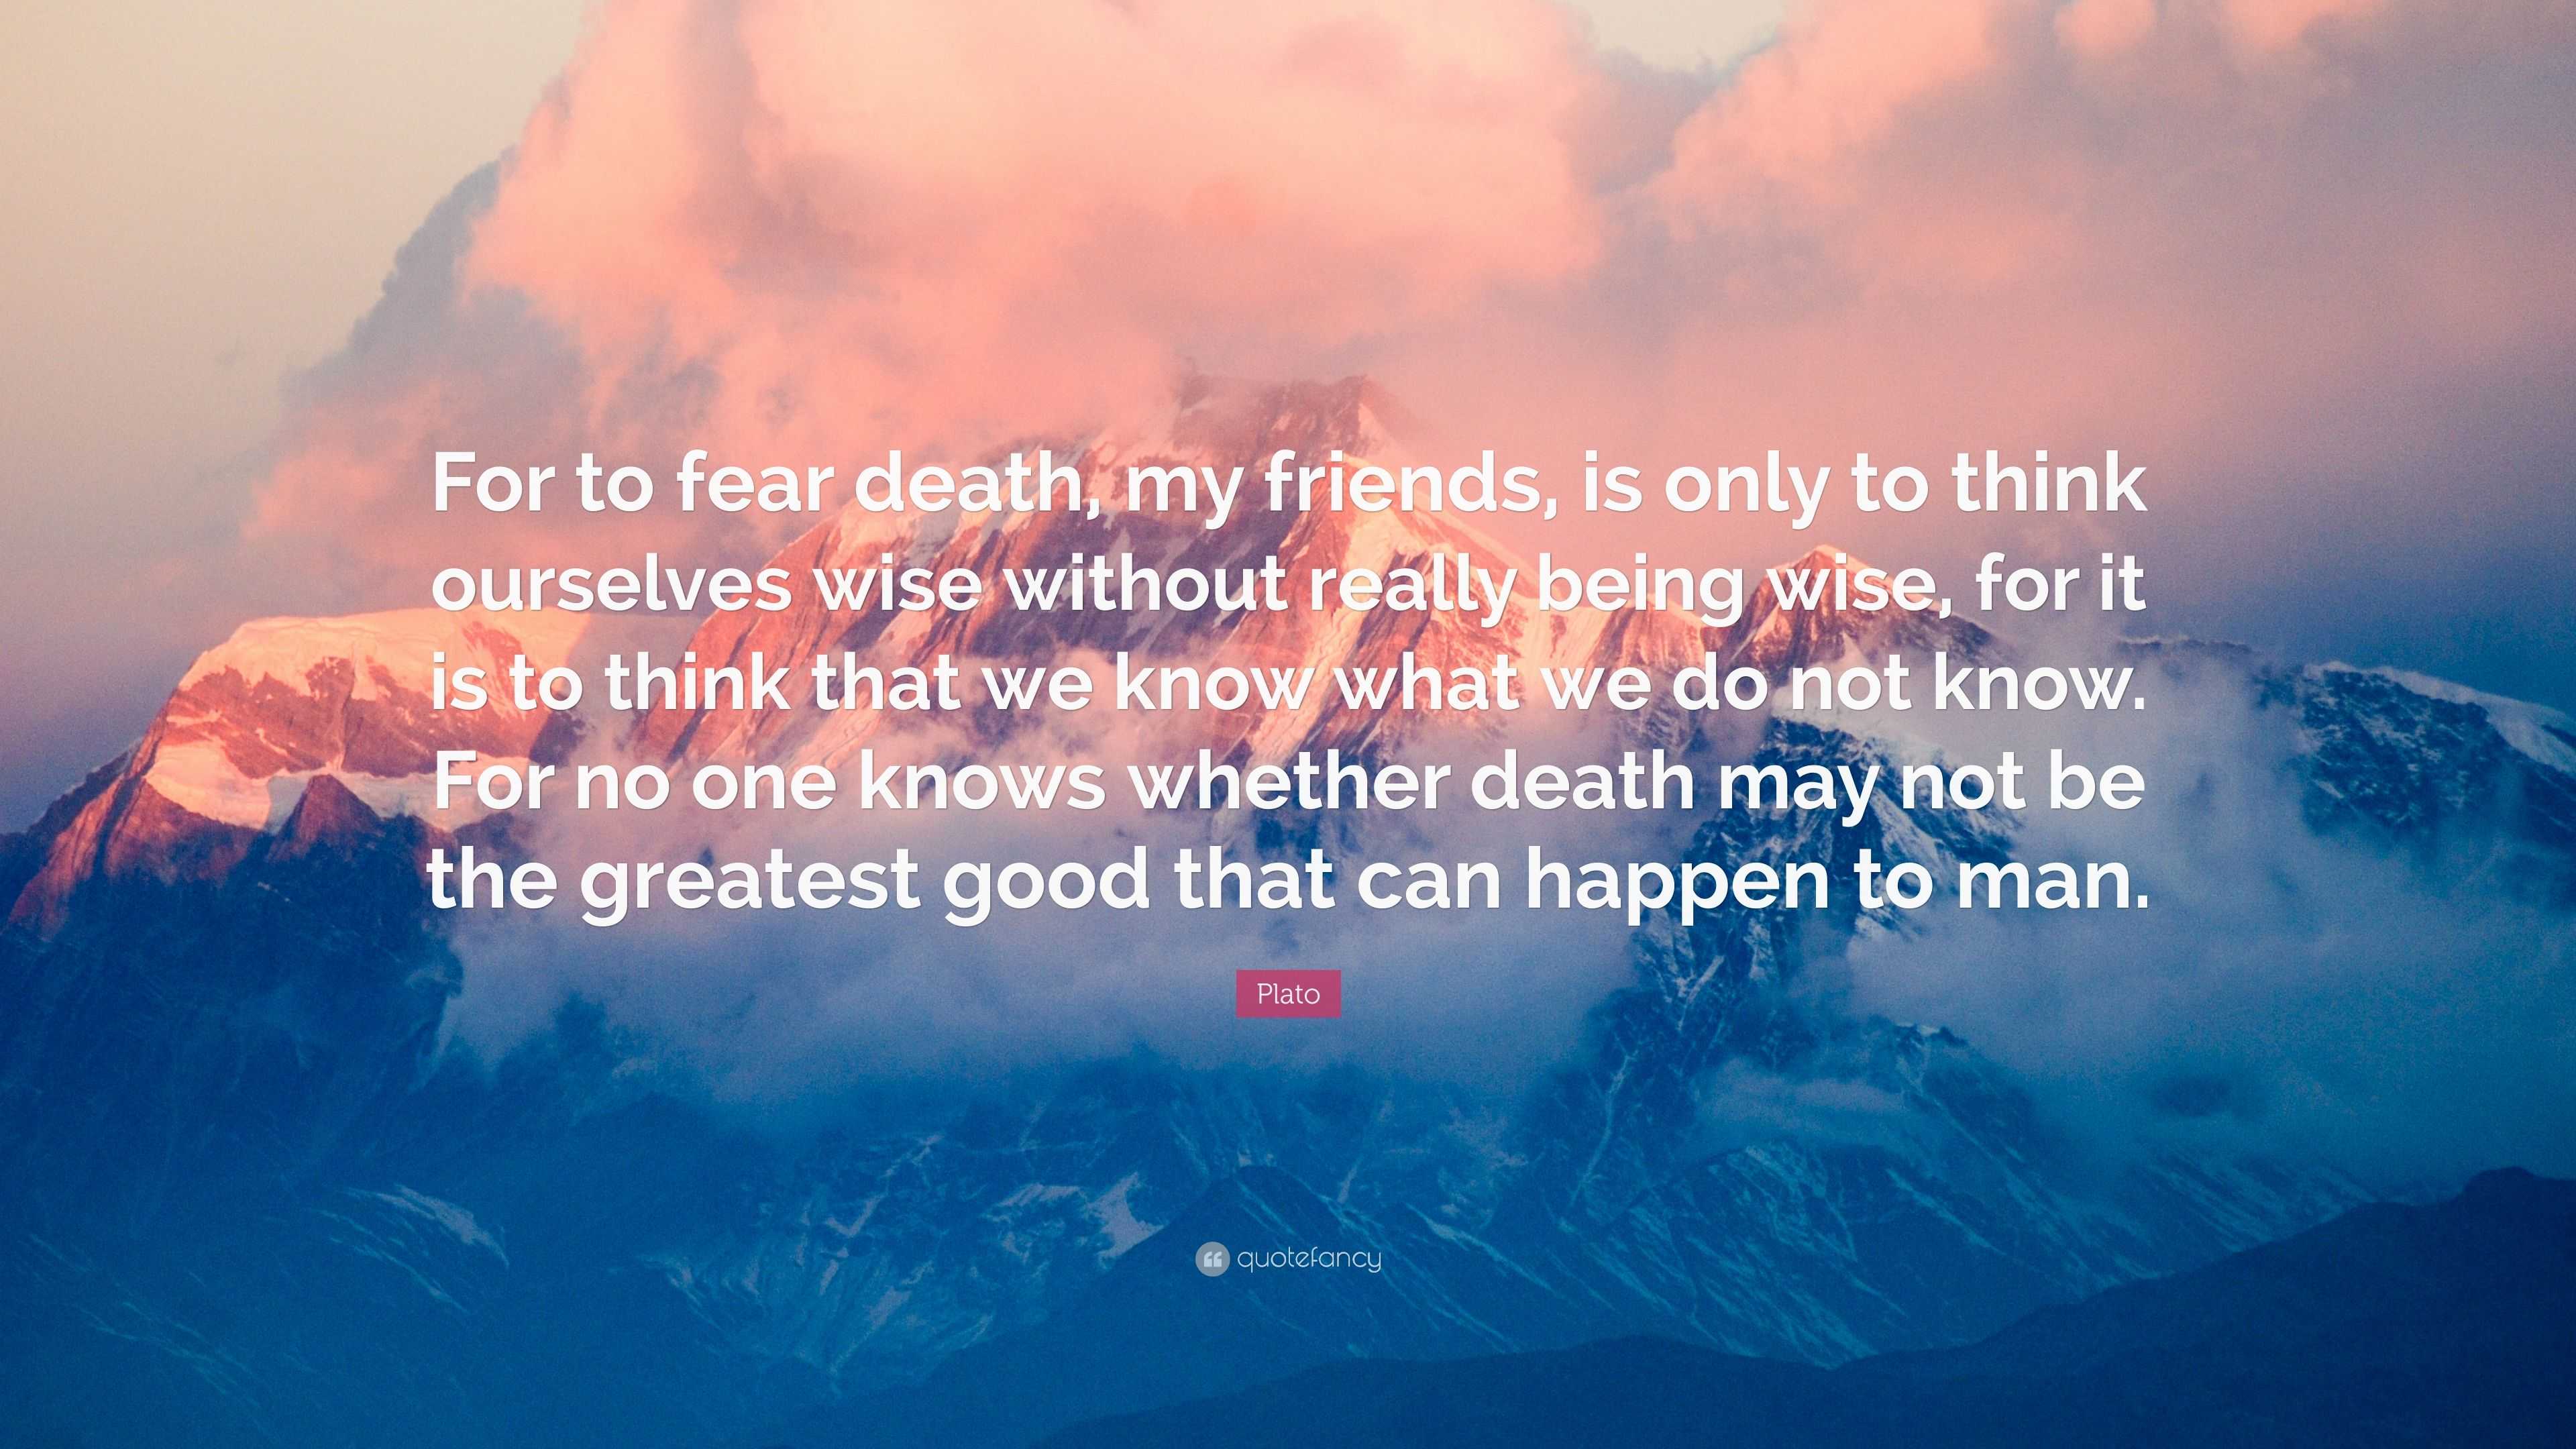 Plato Quote: “For to fear death, my friends, is only to think ourselves ...